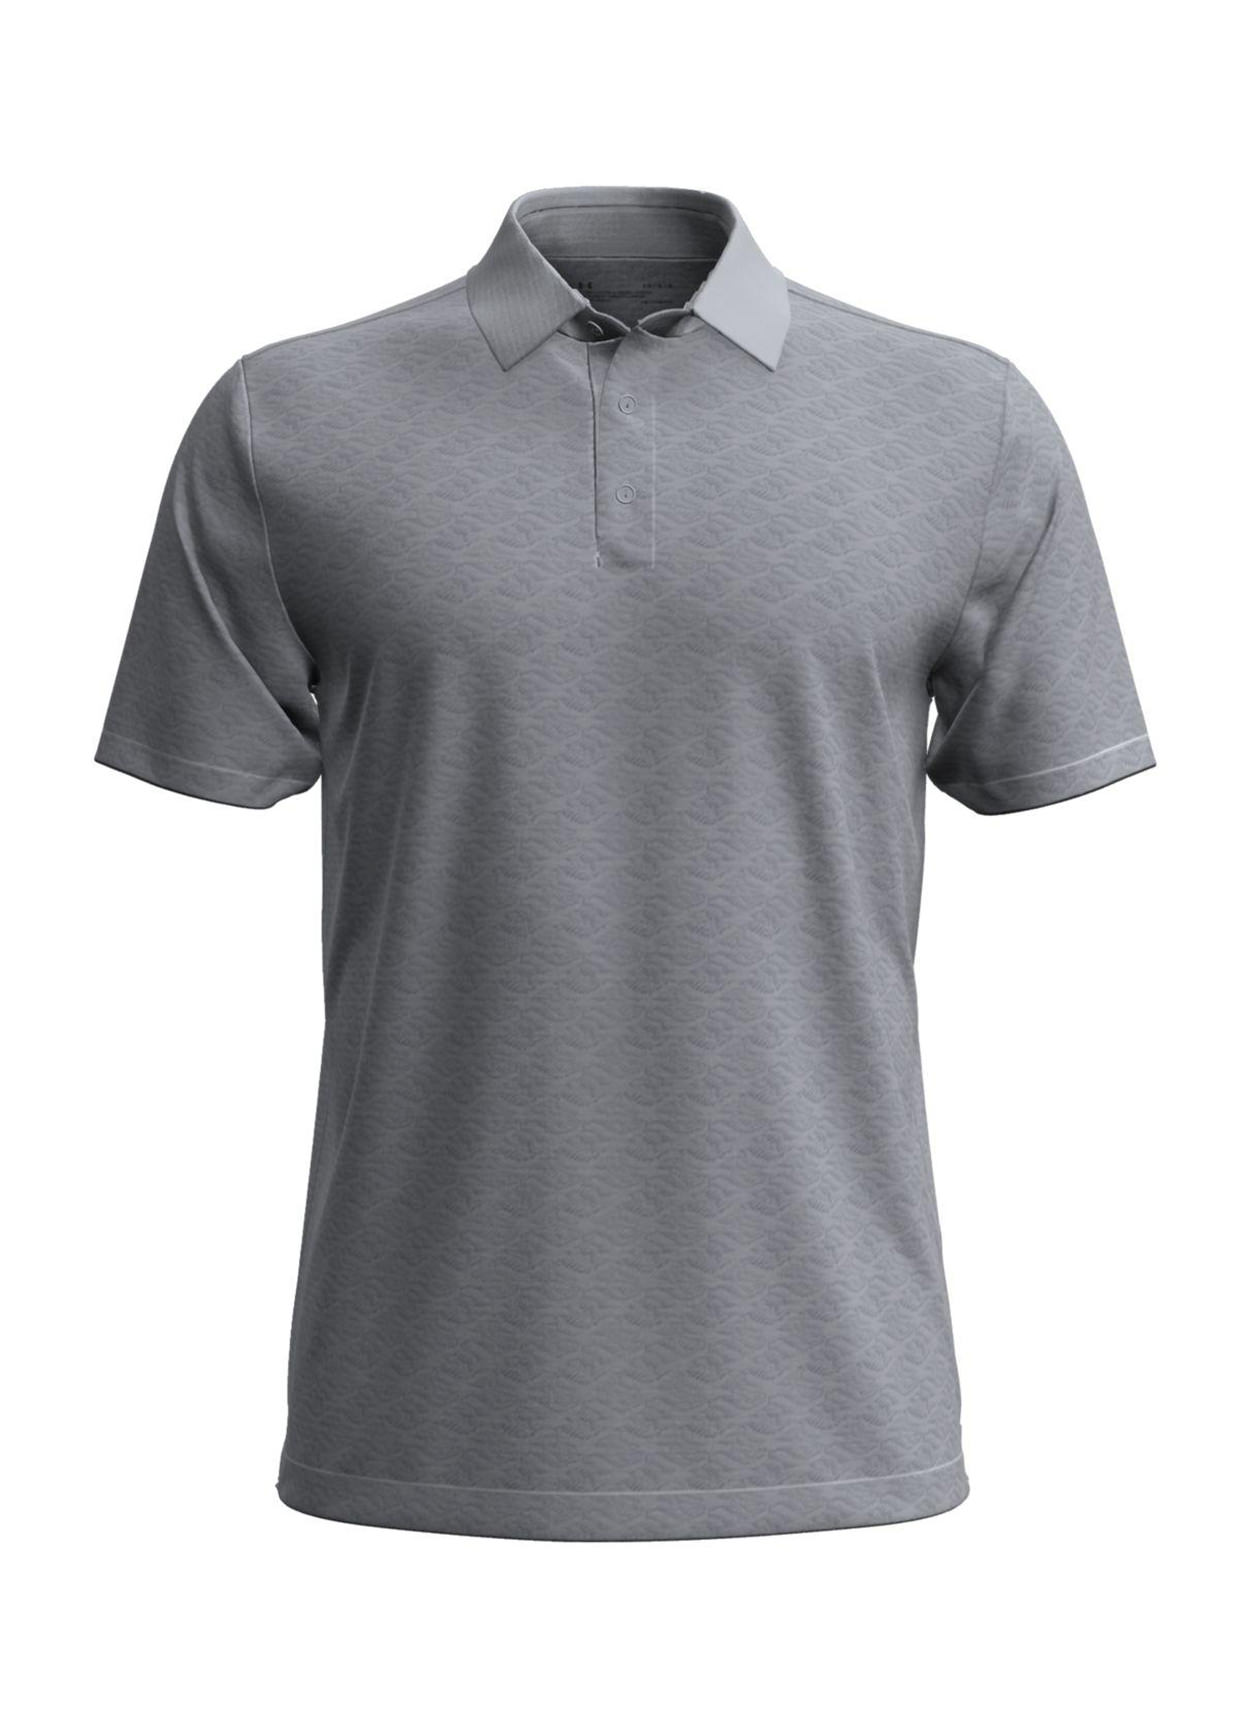 Under Armour Men's Playoff 3.0 Polo - Black, MD